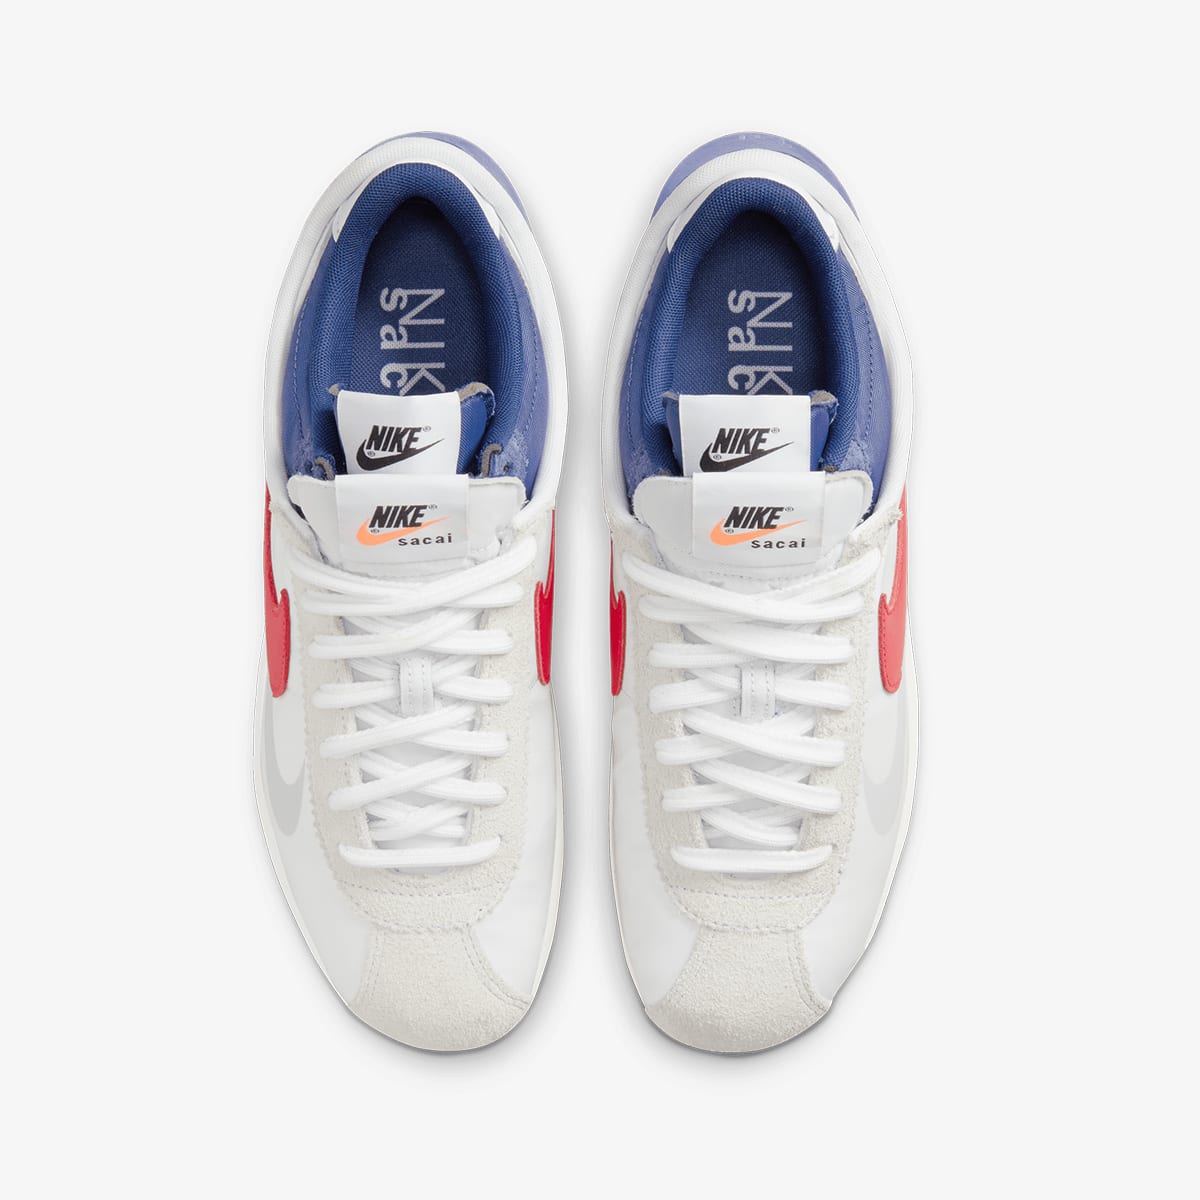 Nike x Sacai Zoom Cortez SP (White & University Red) | END. Launches